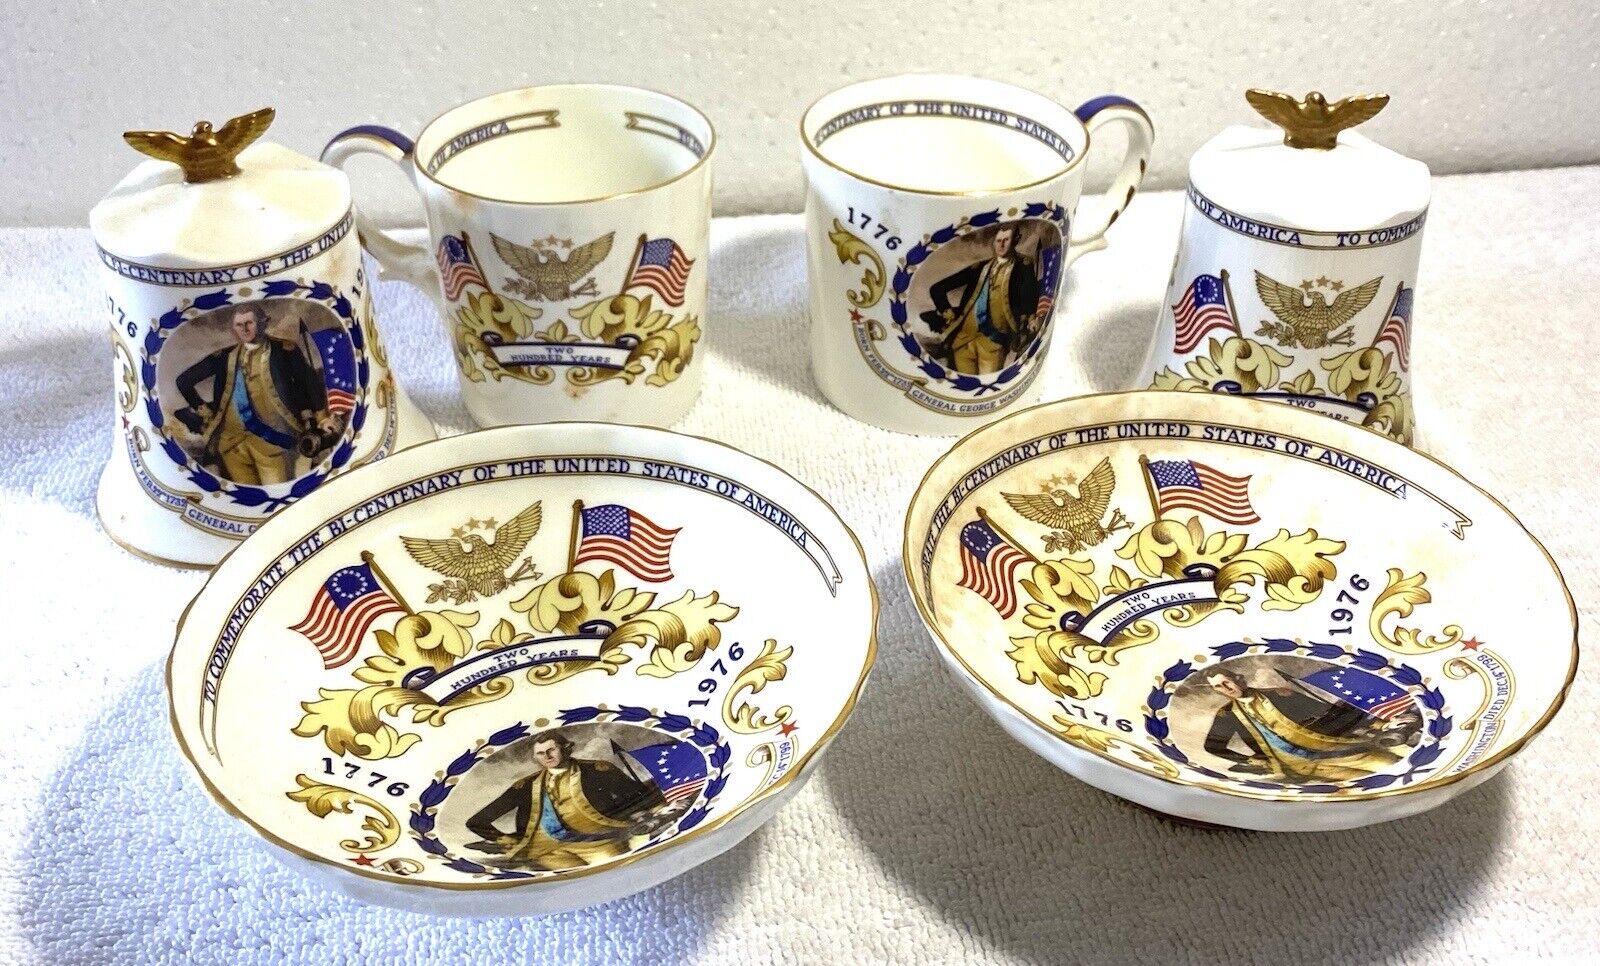 2 Sets Of 3 Ainsley Commemorate The Bi-Centenary Of The United States Of America